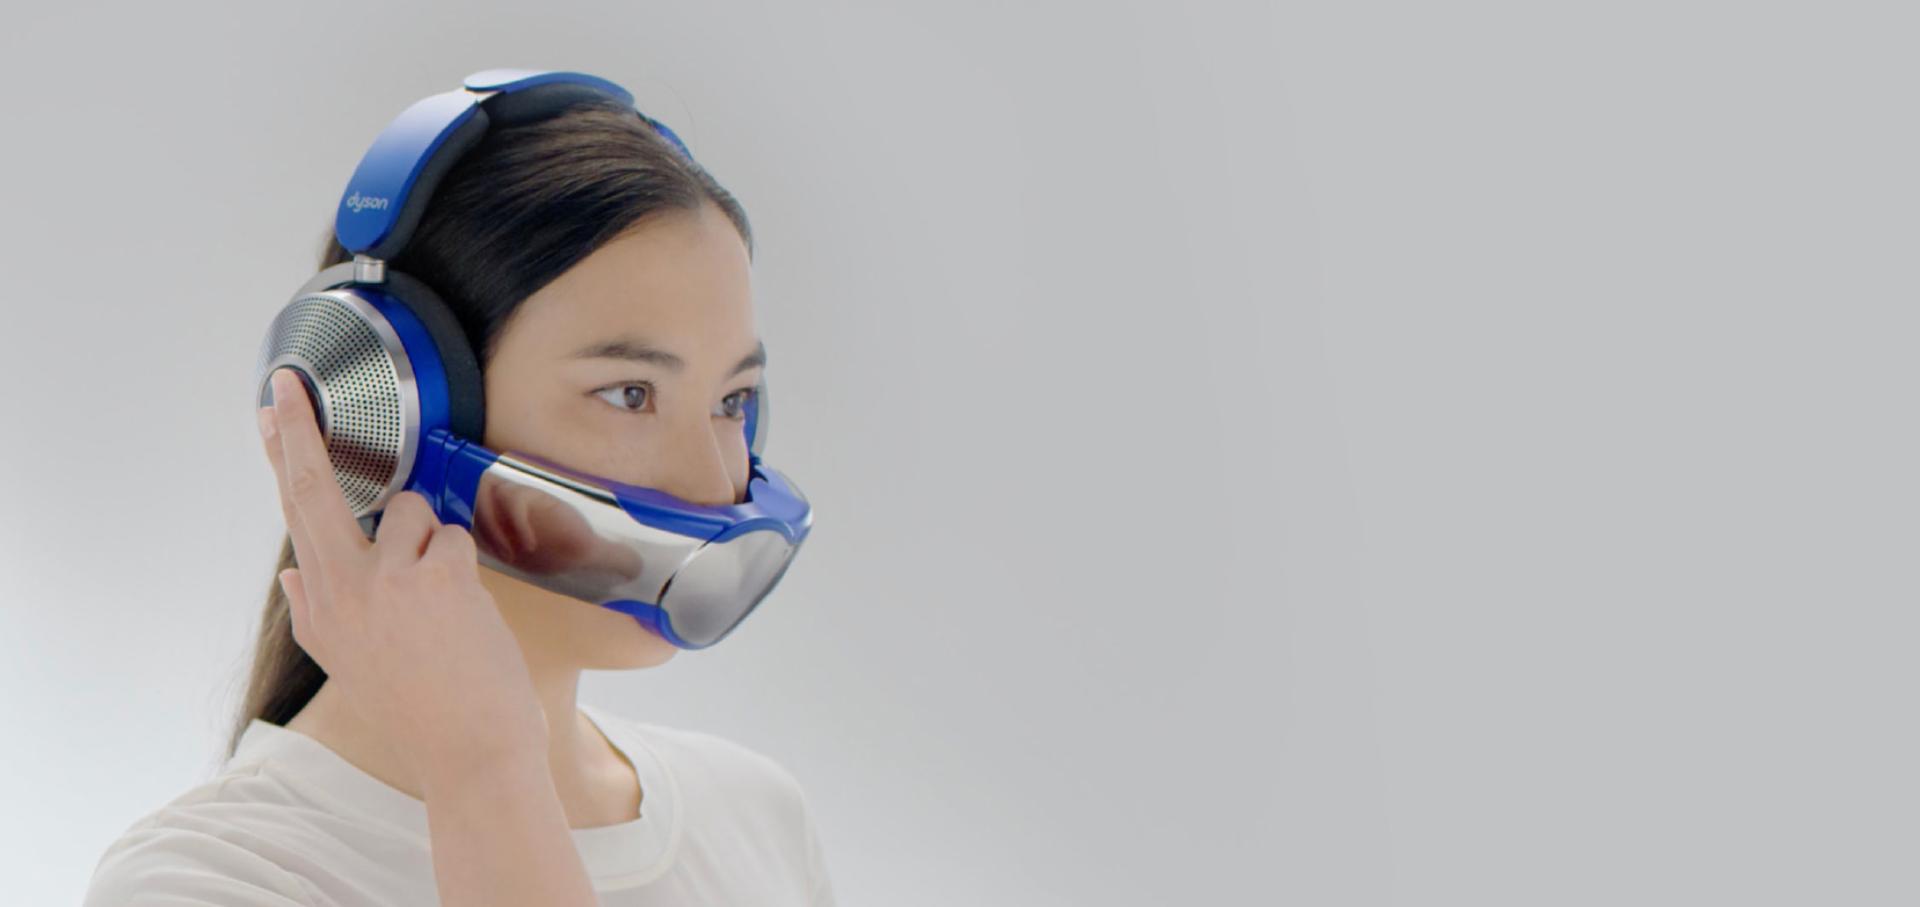 Woman taps the side of the ear cup to change ANC modes on the Dyson Zone air-purifying headphones.